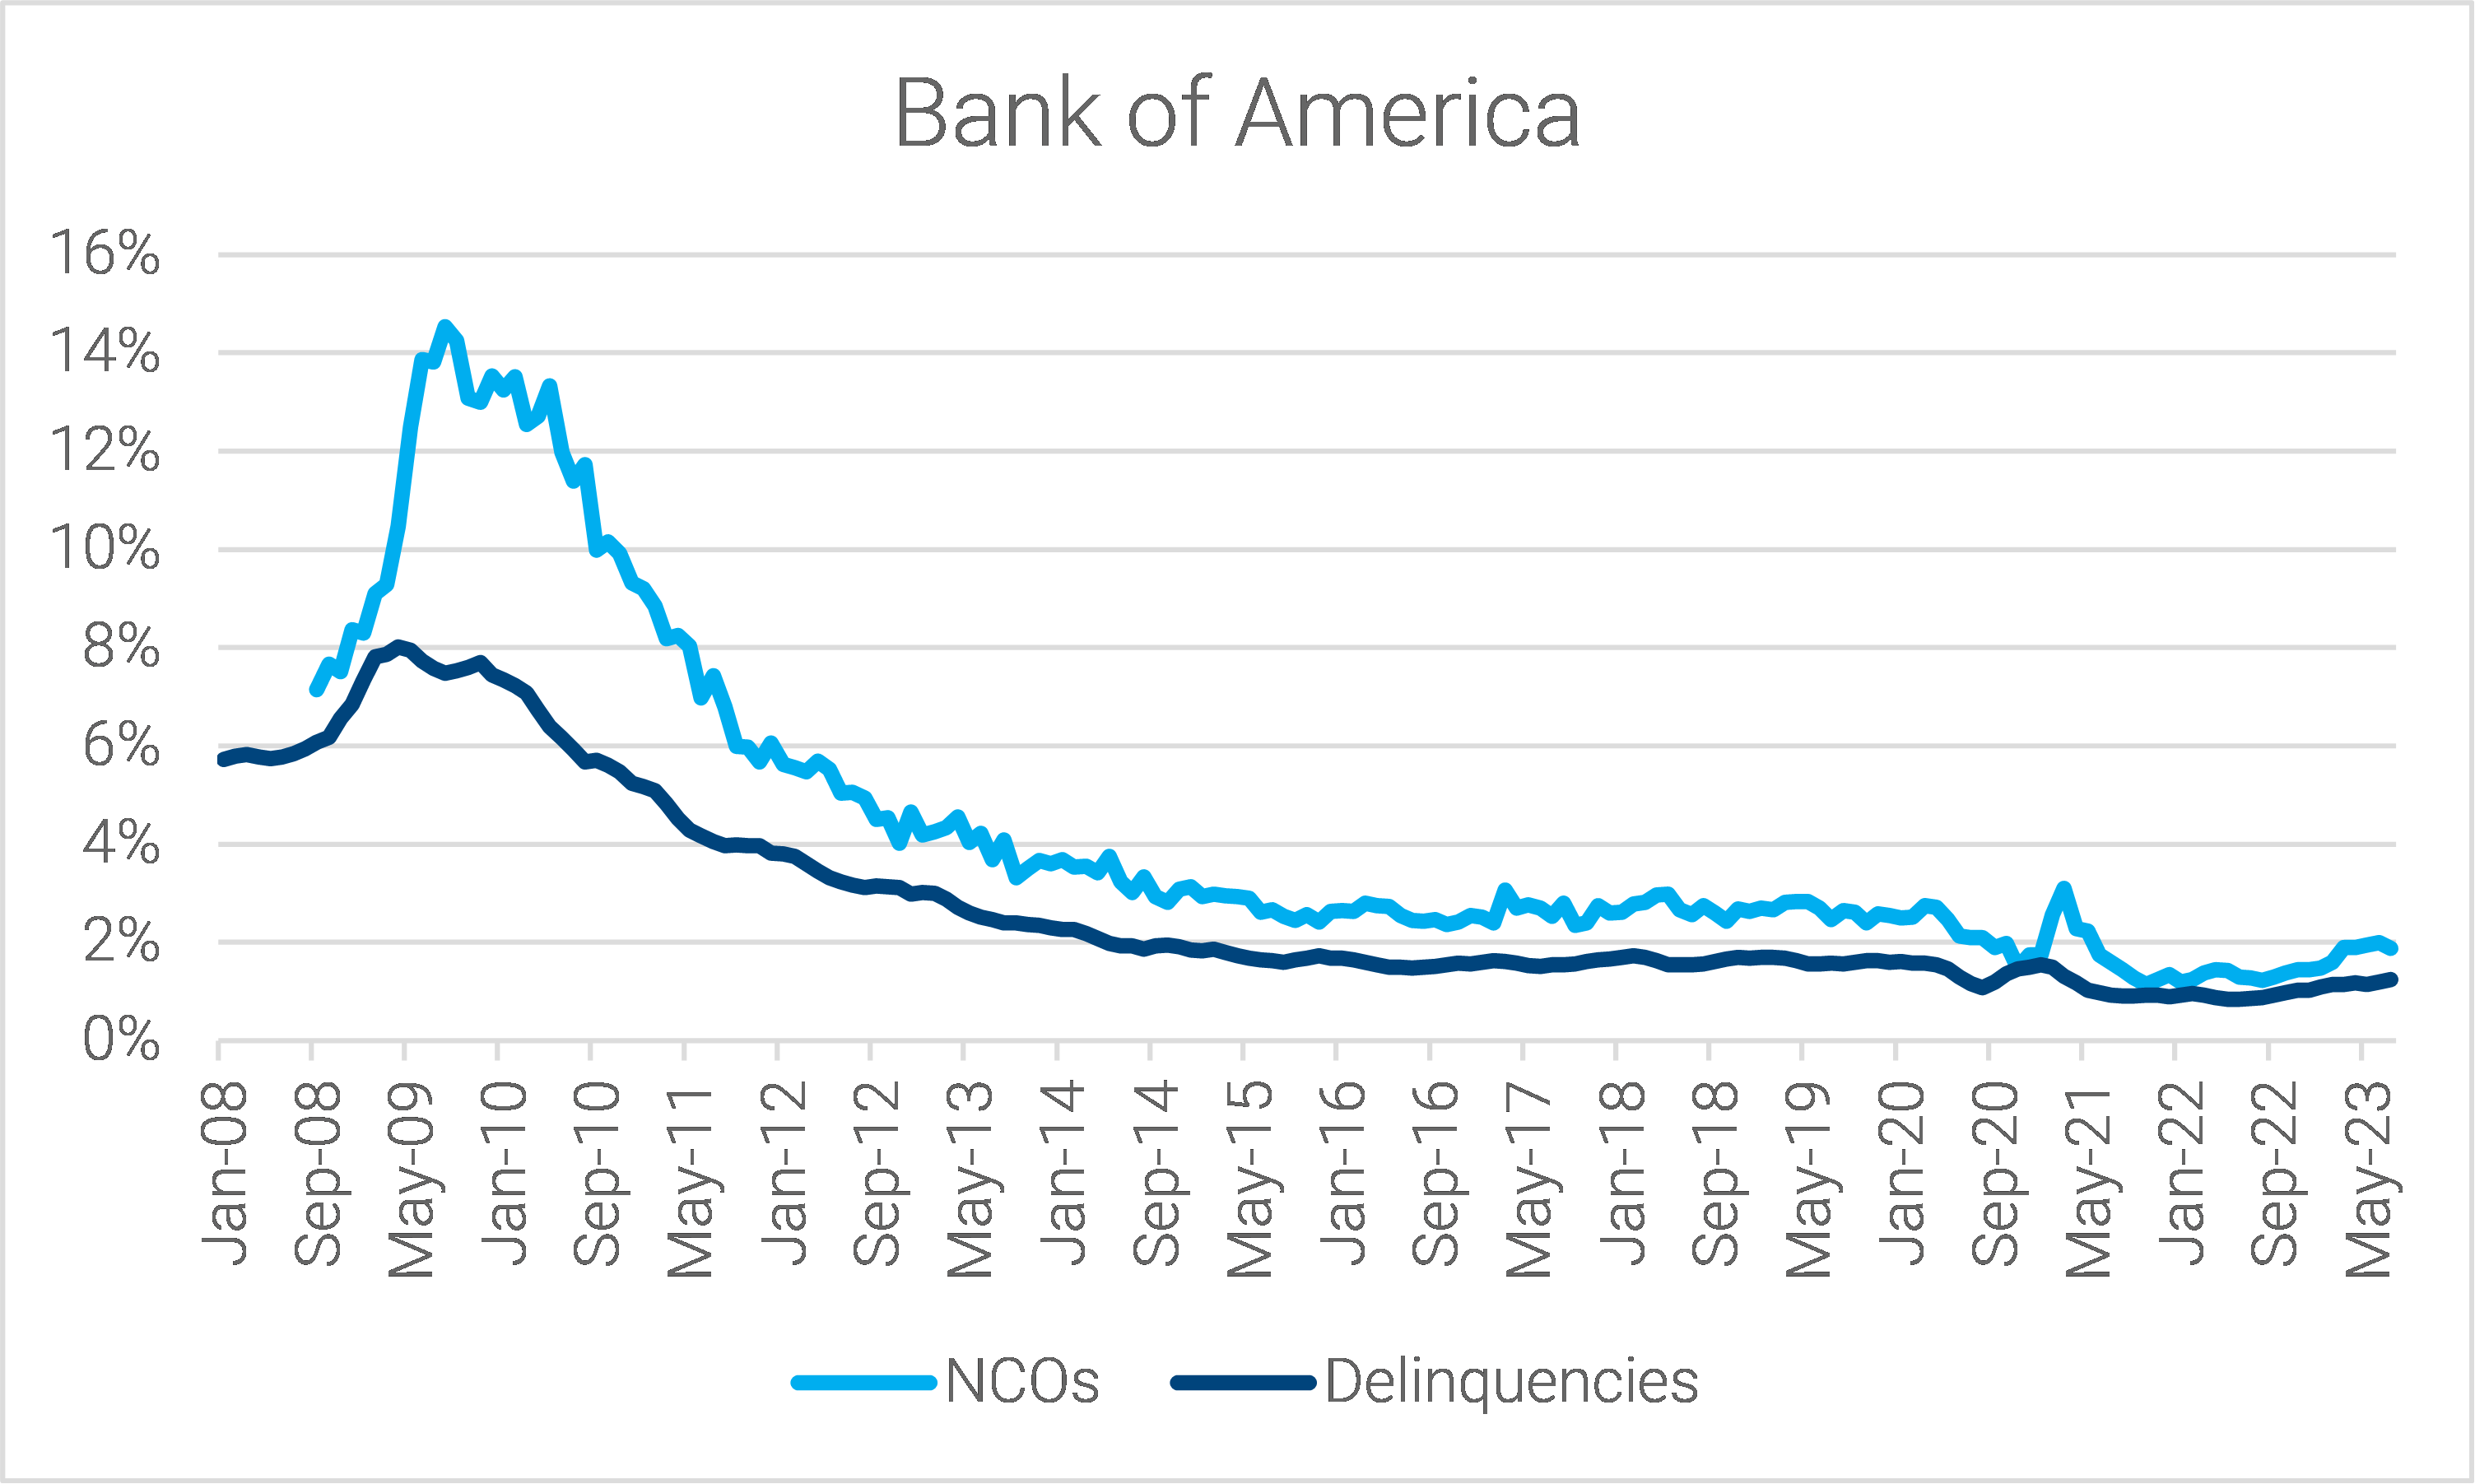 04-bank-of-america-master-trust-net-charge-off-and-delinquency-rates